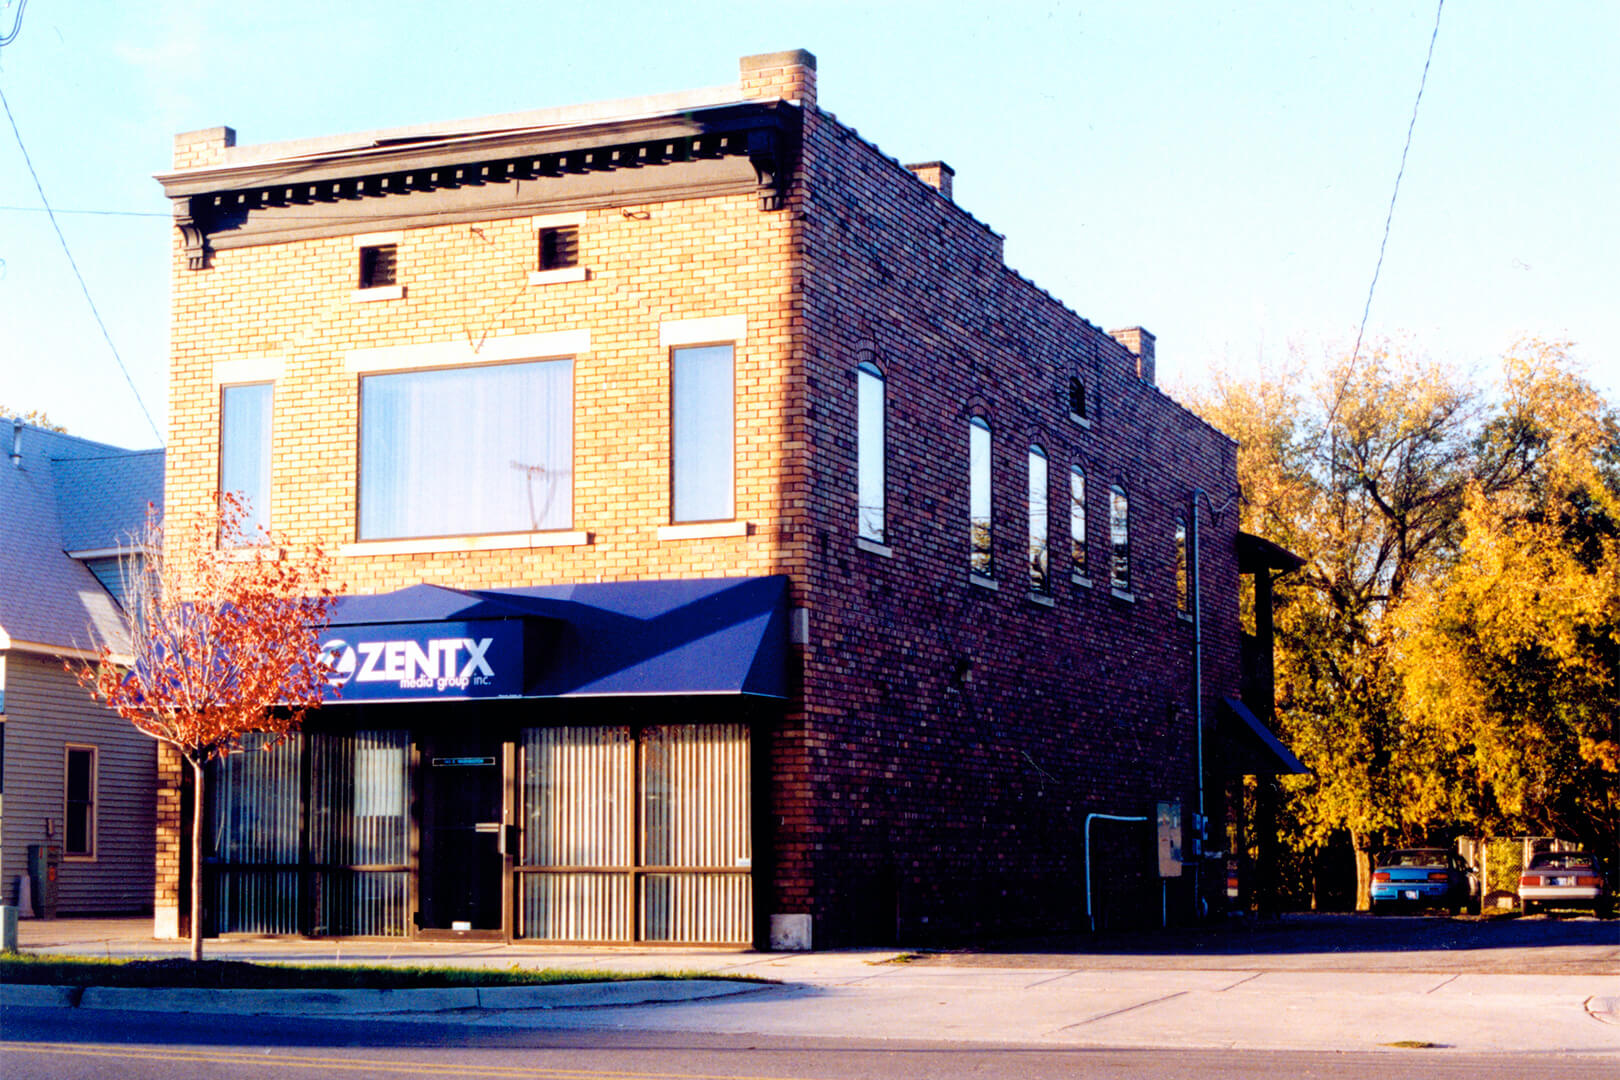 View of ZENTX's old office from the street